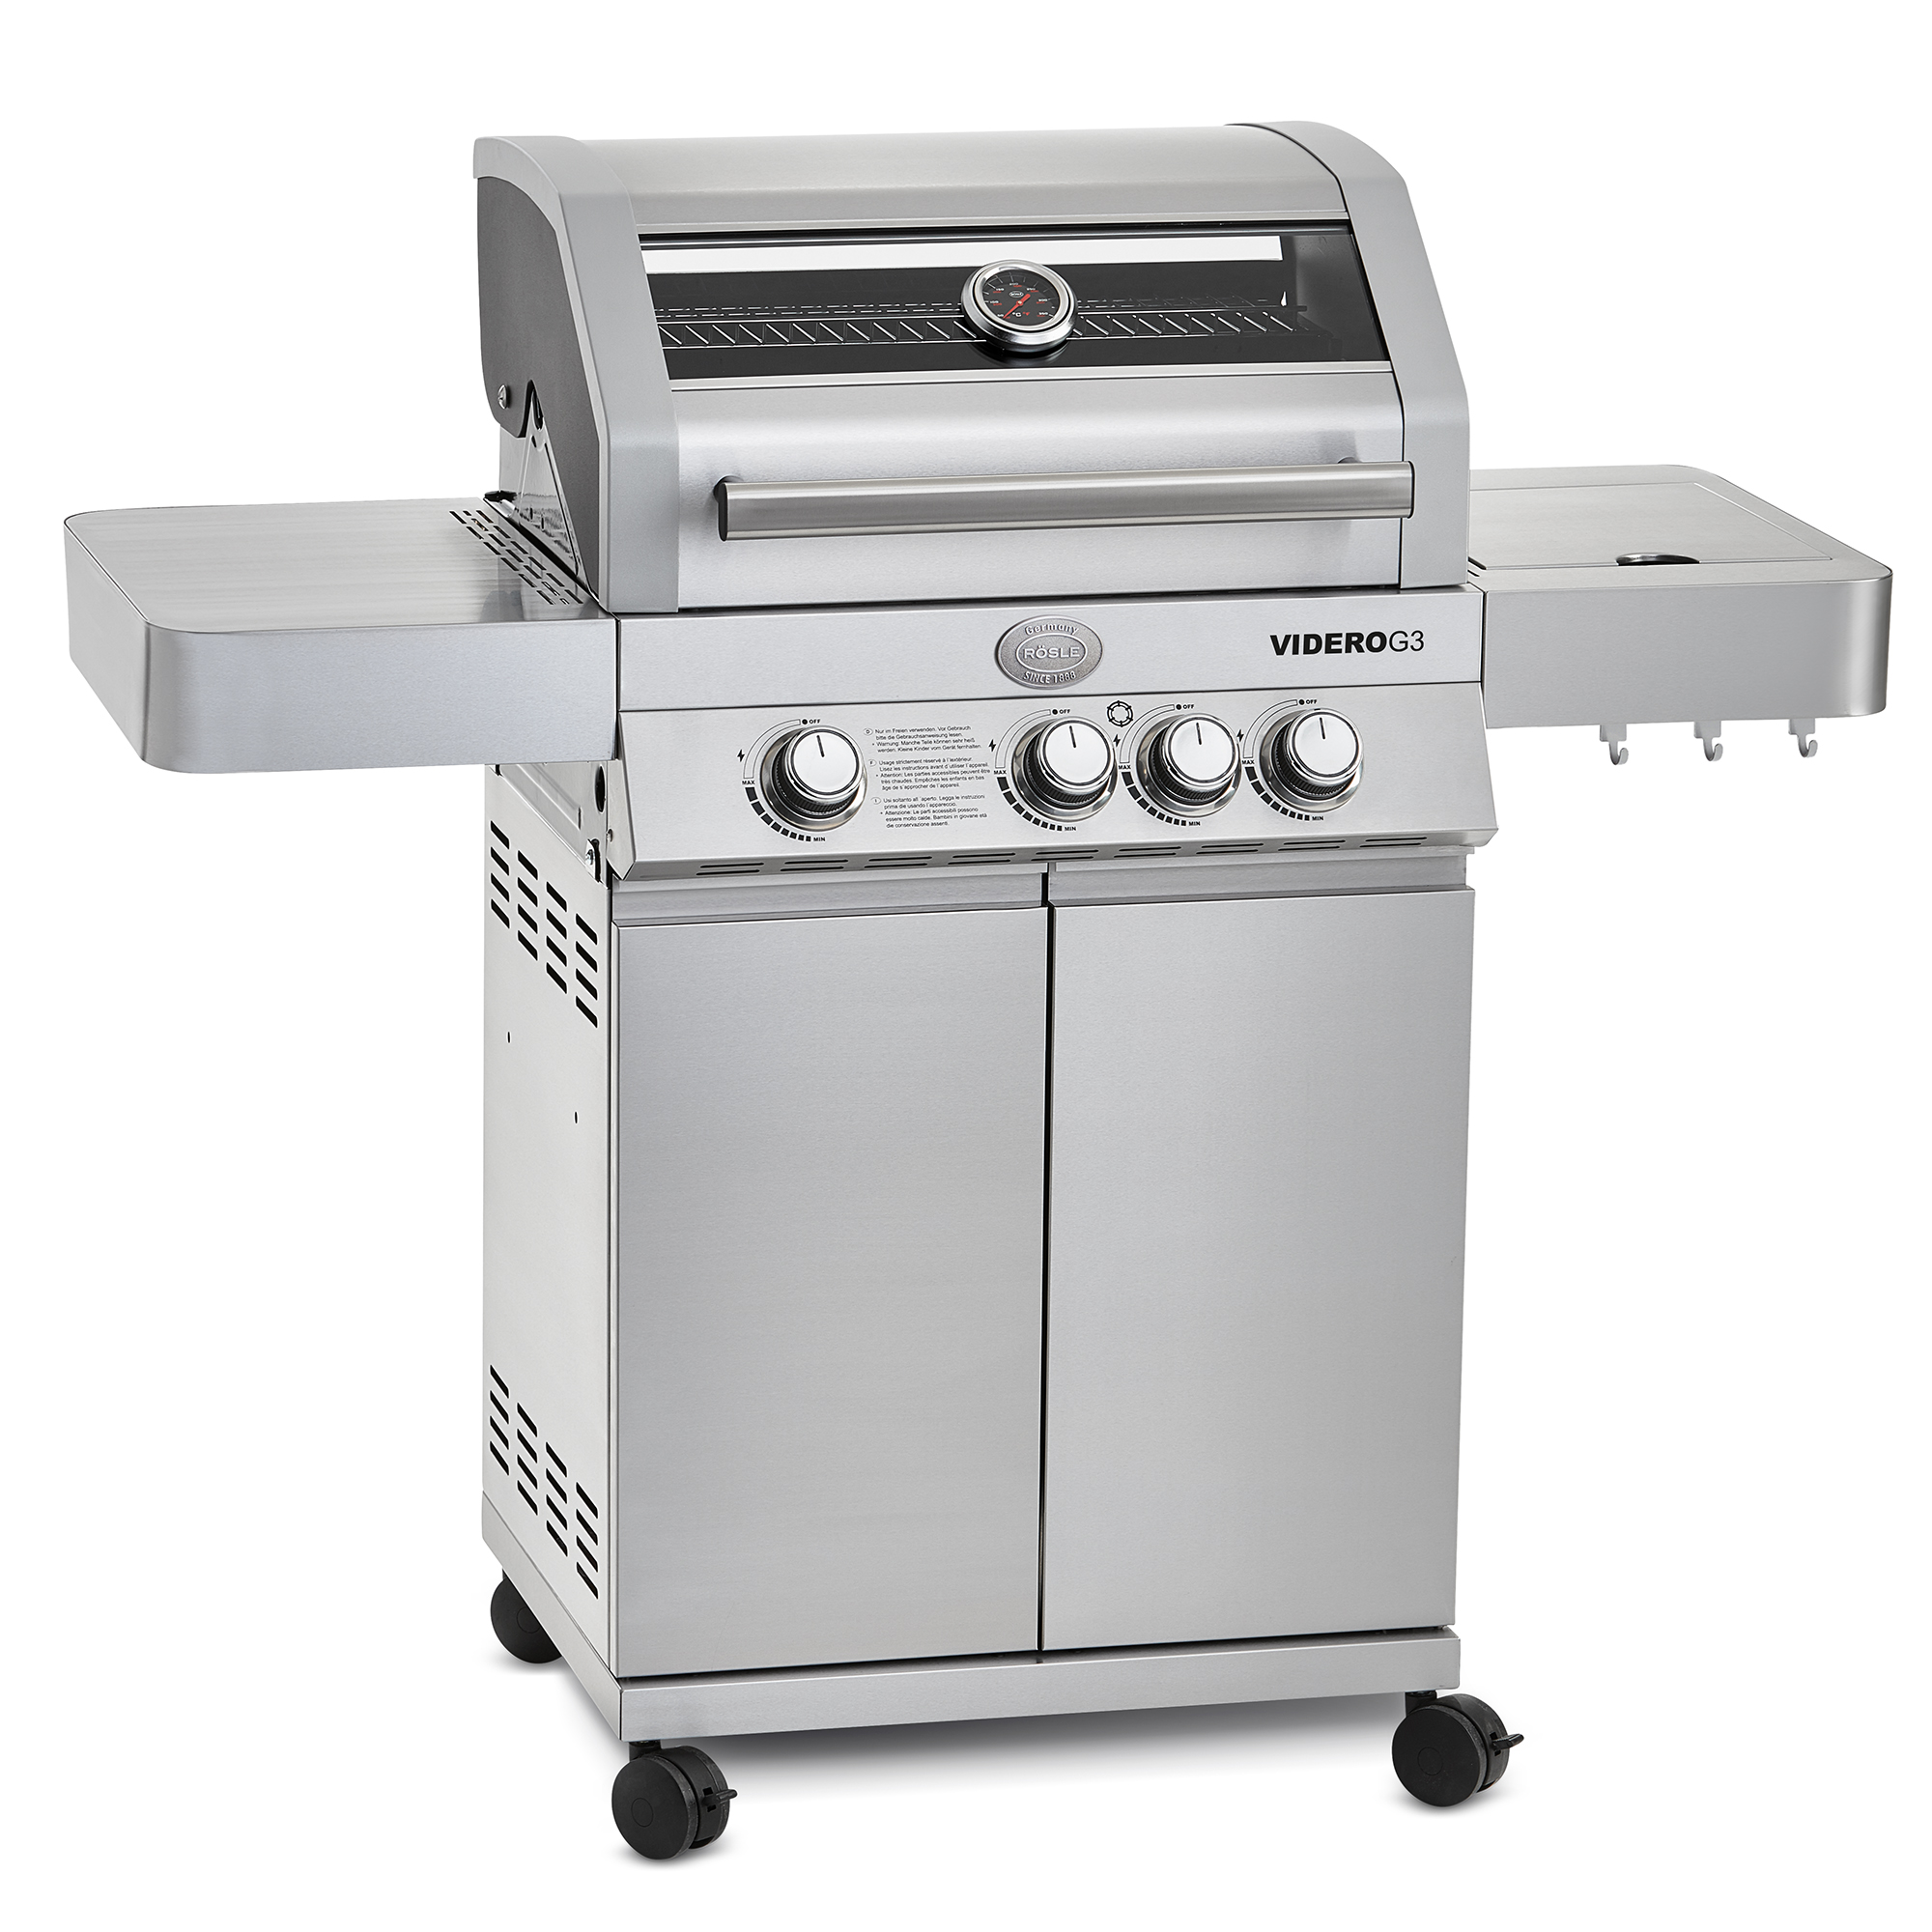 Gas gill BBQ station Videro G3 stainless steel 50 mbar